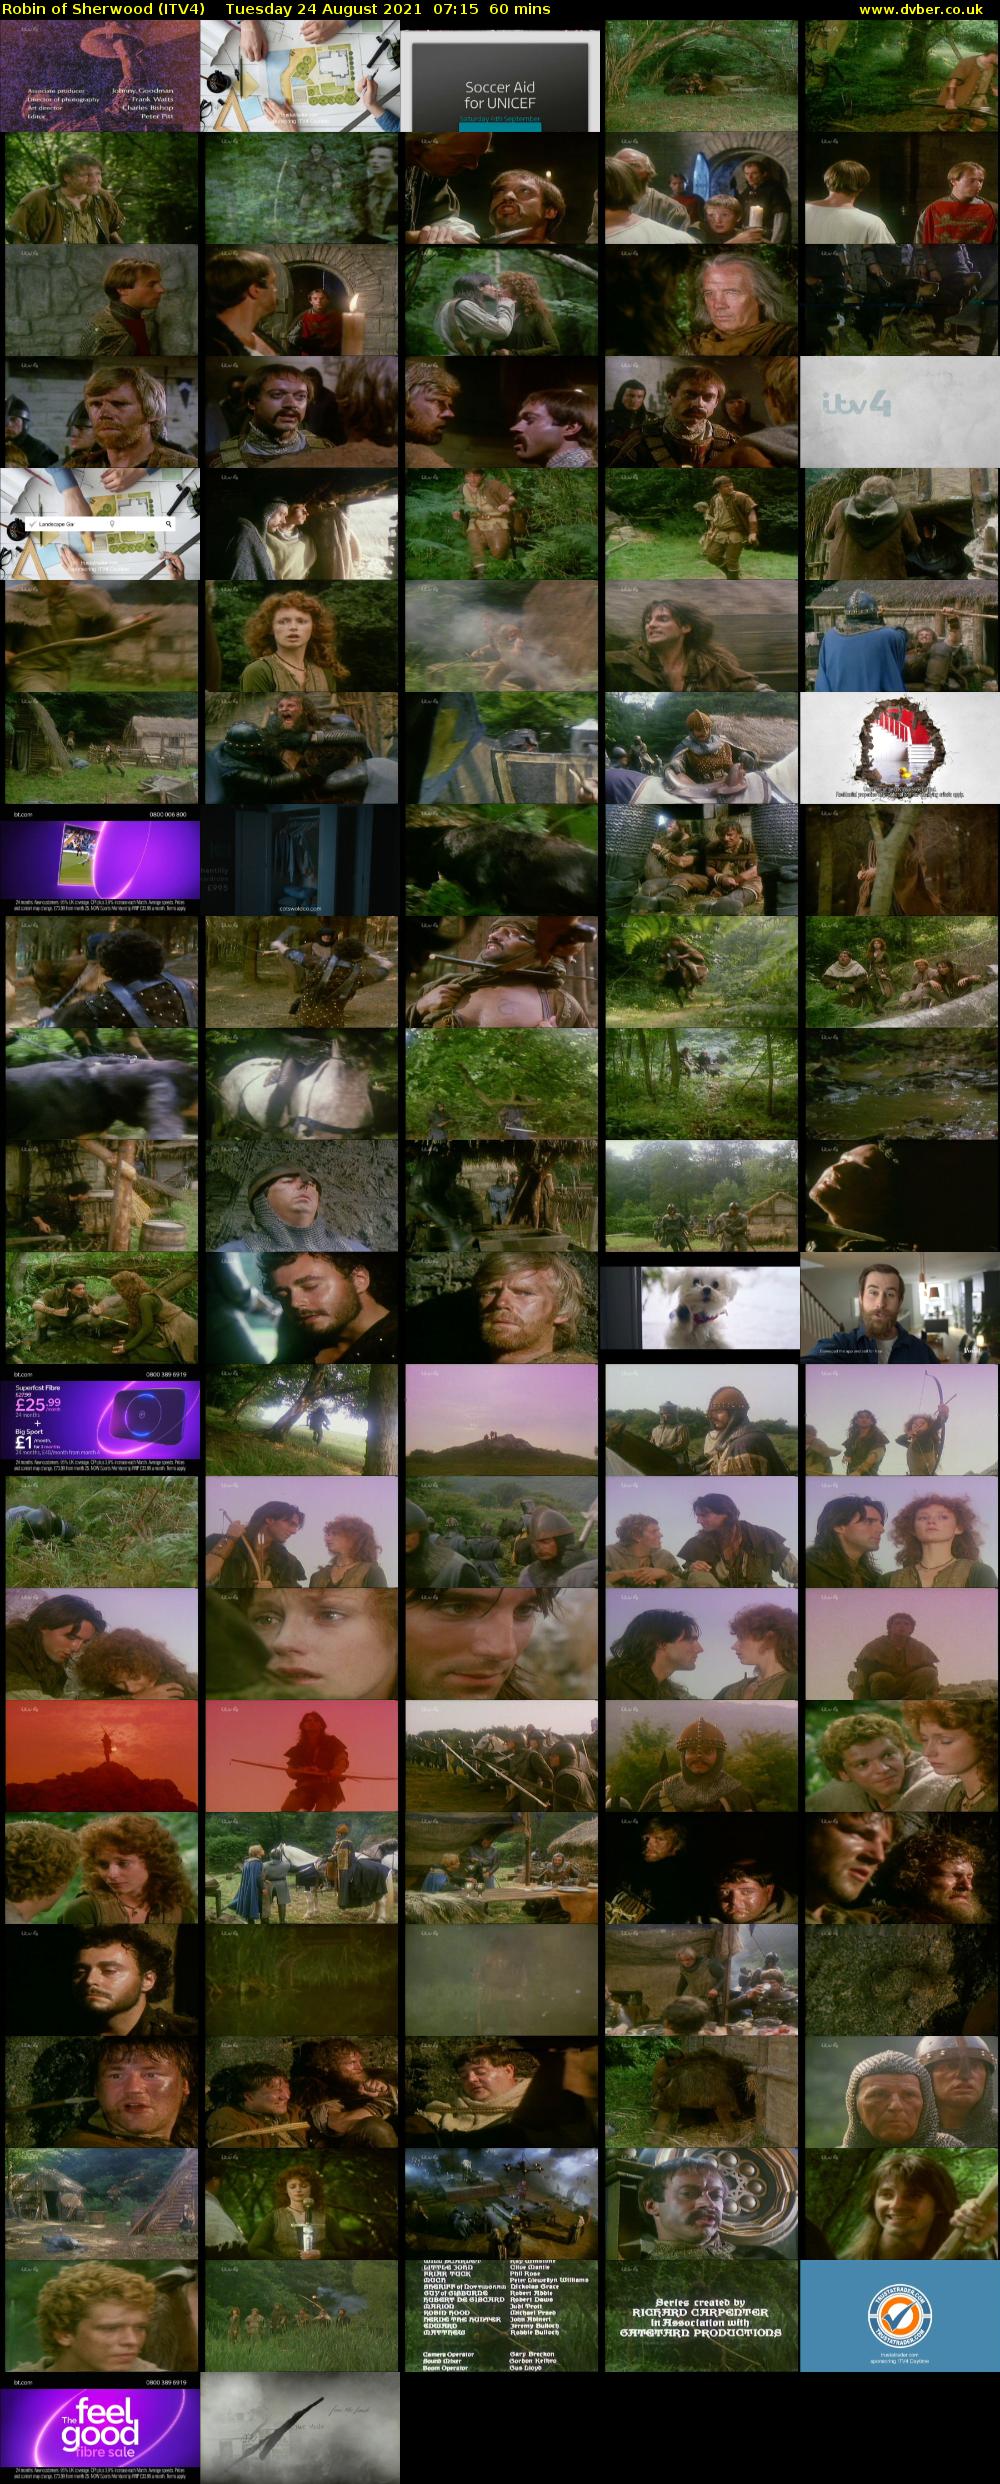 Robin of Sherwood (ITV4) Tuesday 24 August 2021 07:15 - 08:15